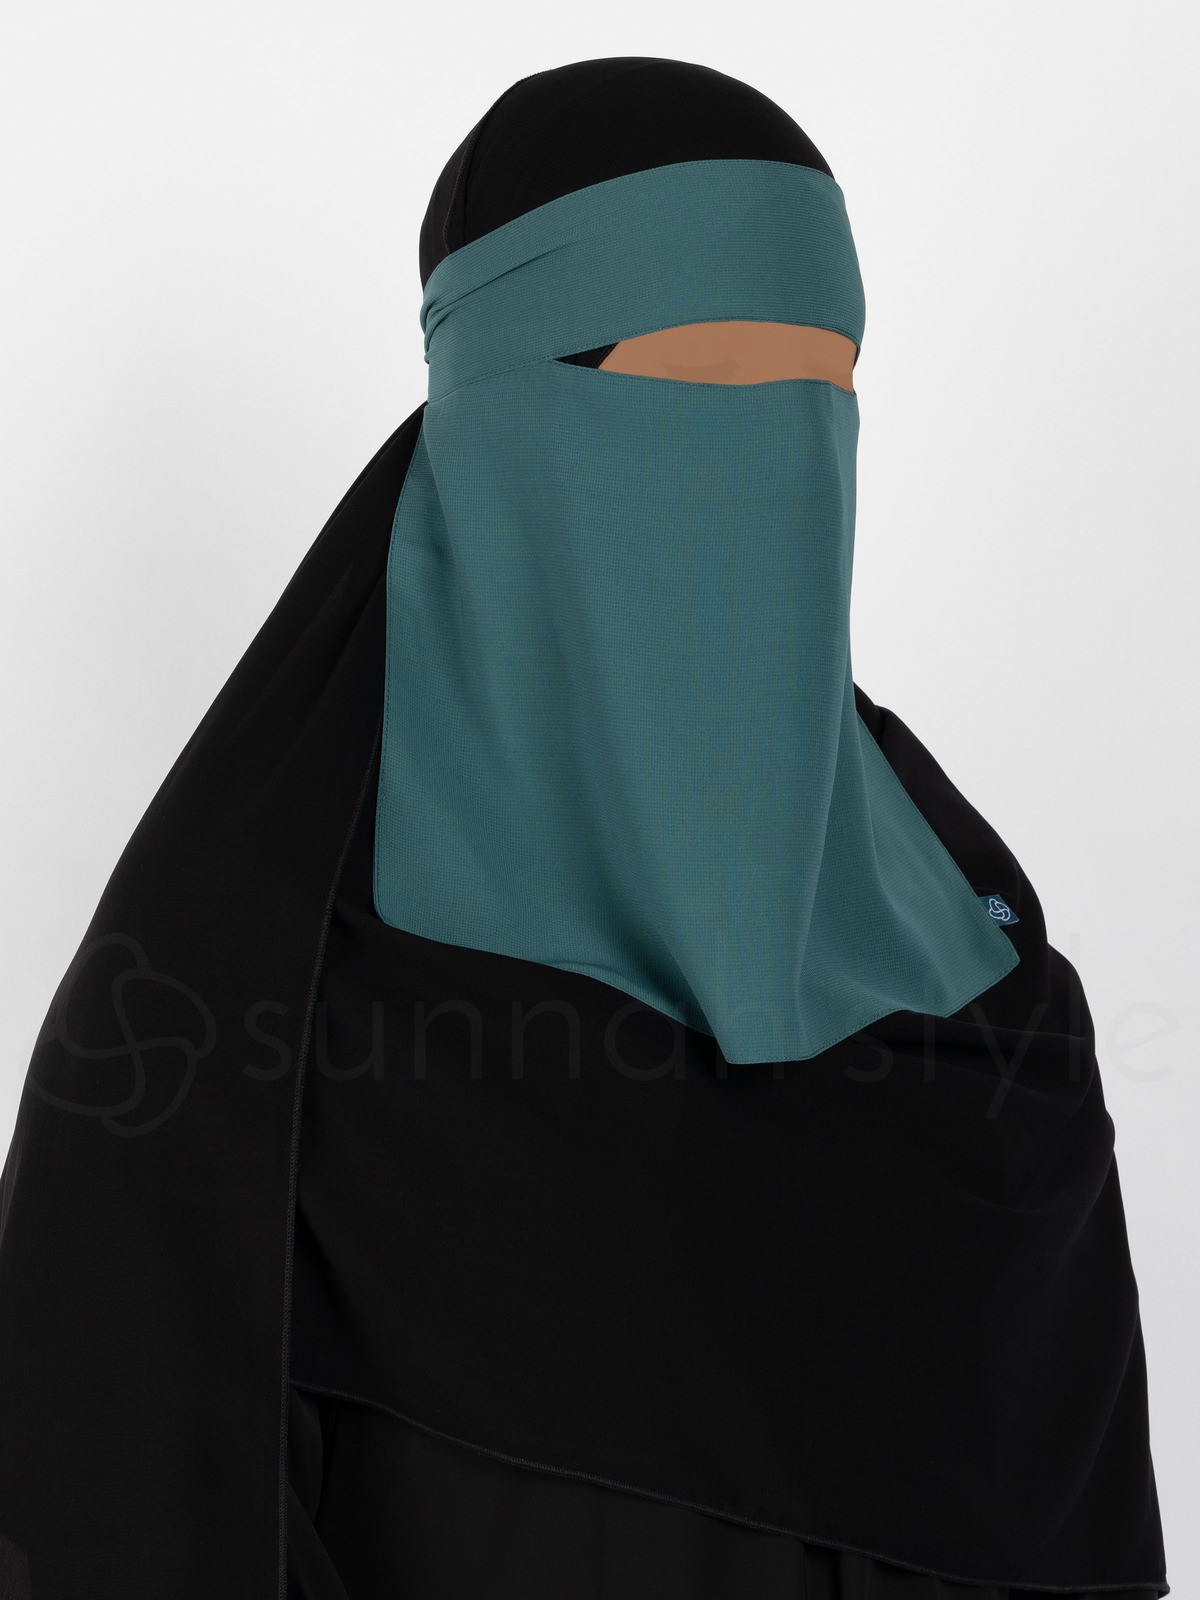 Sunnah Style - Short One Layer Niqab (Teal)